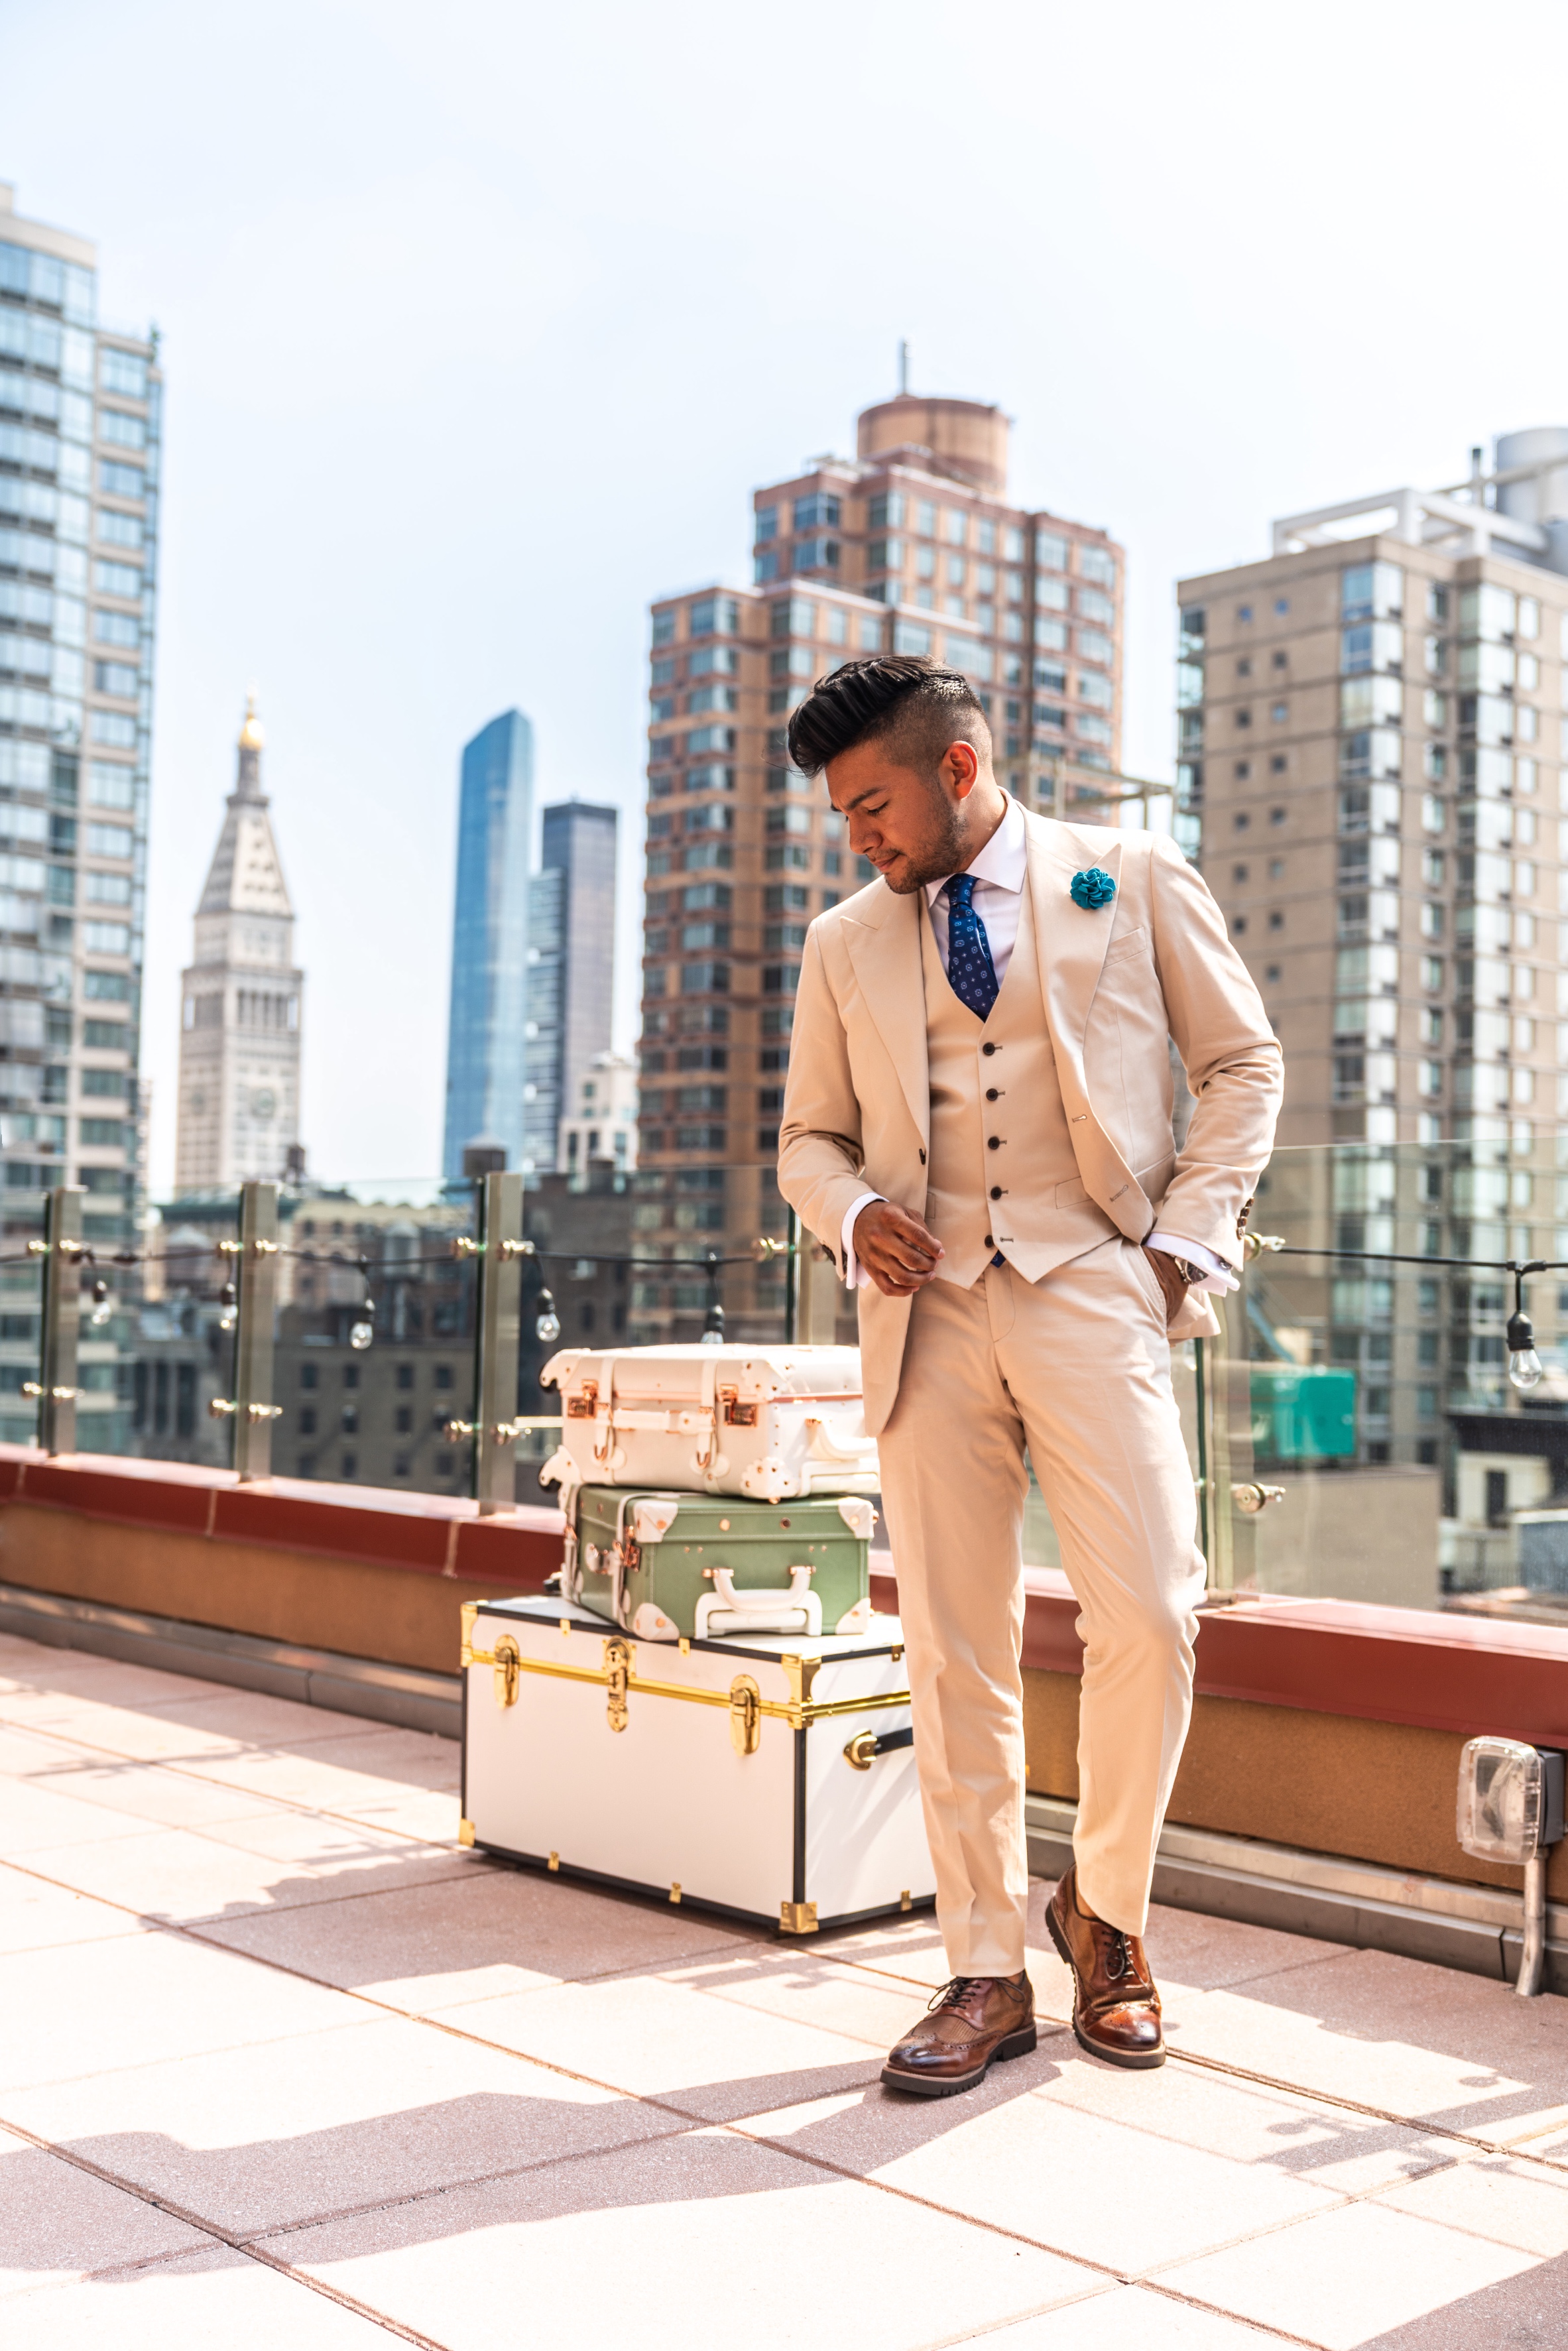 dandy in the bronx - khaki three piece suit - at cambria hotel 001